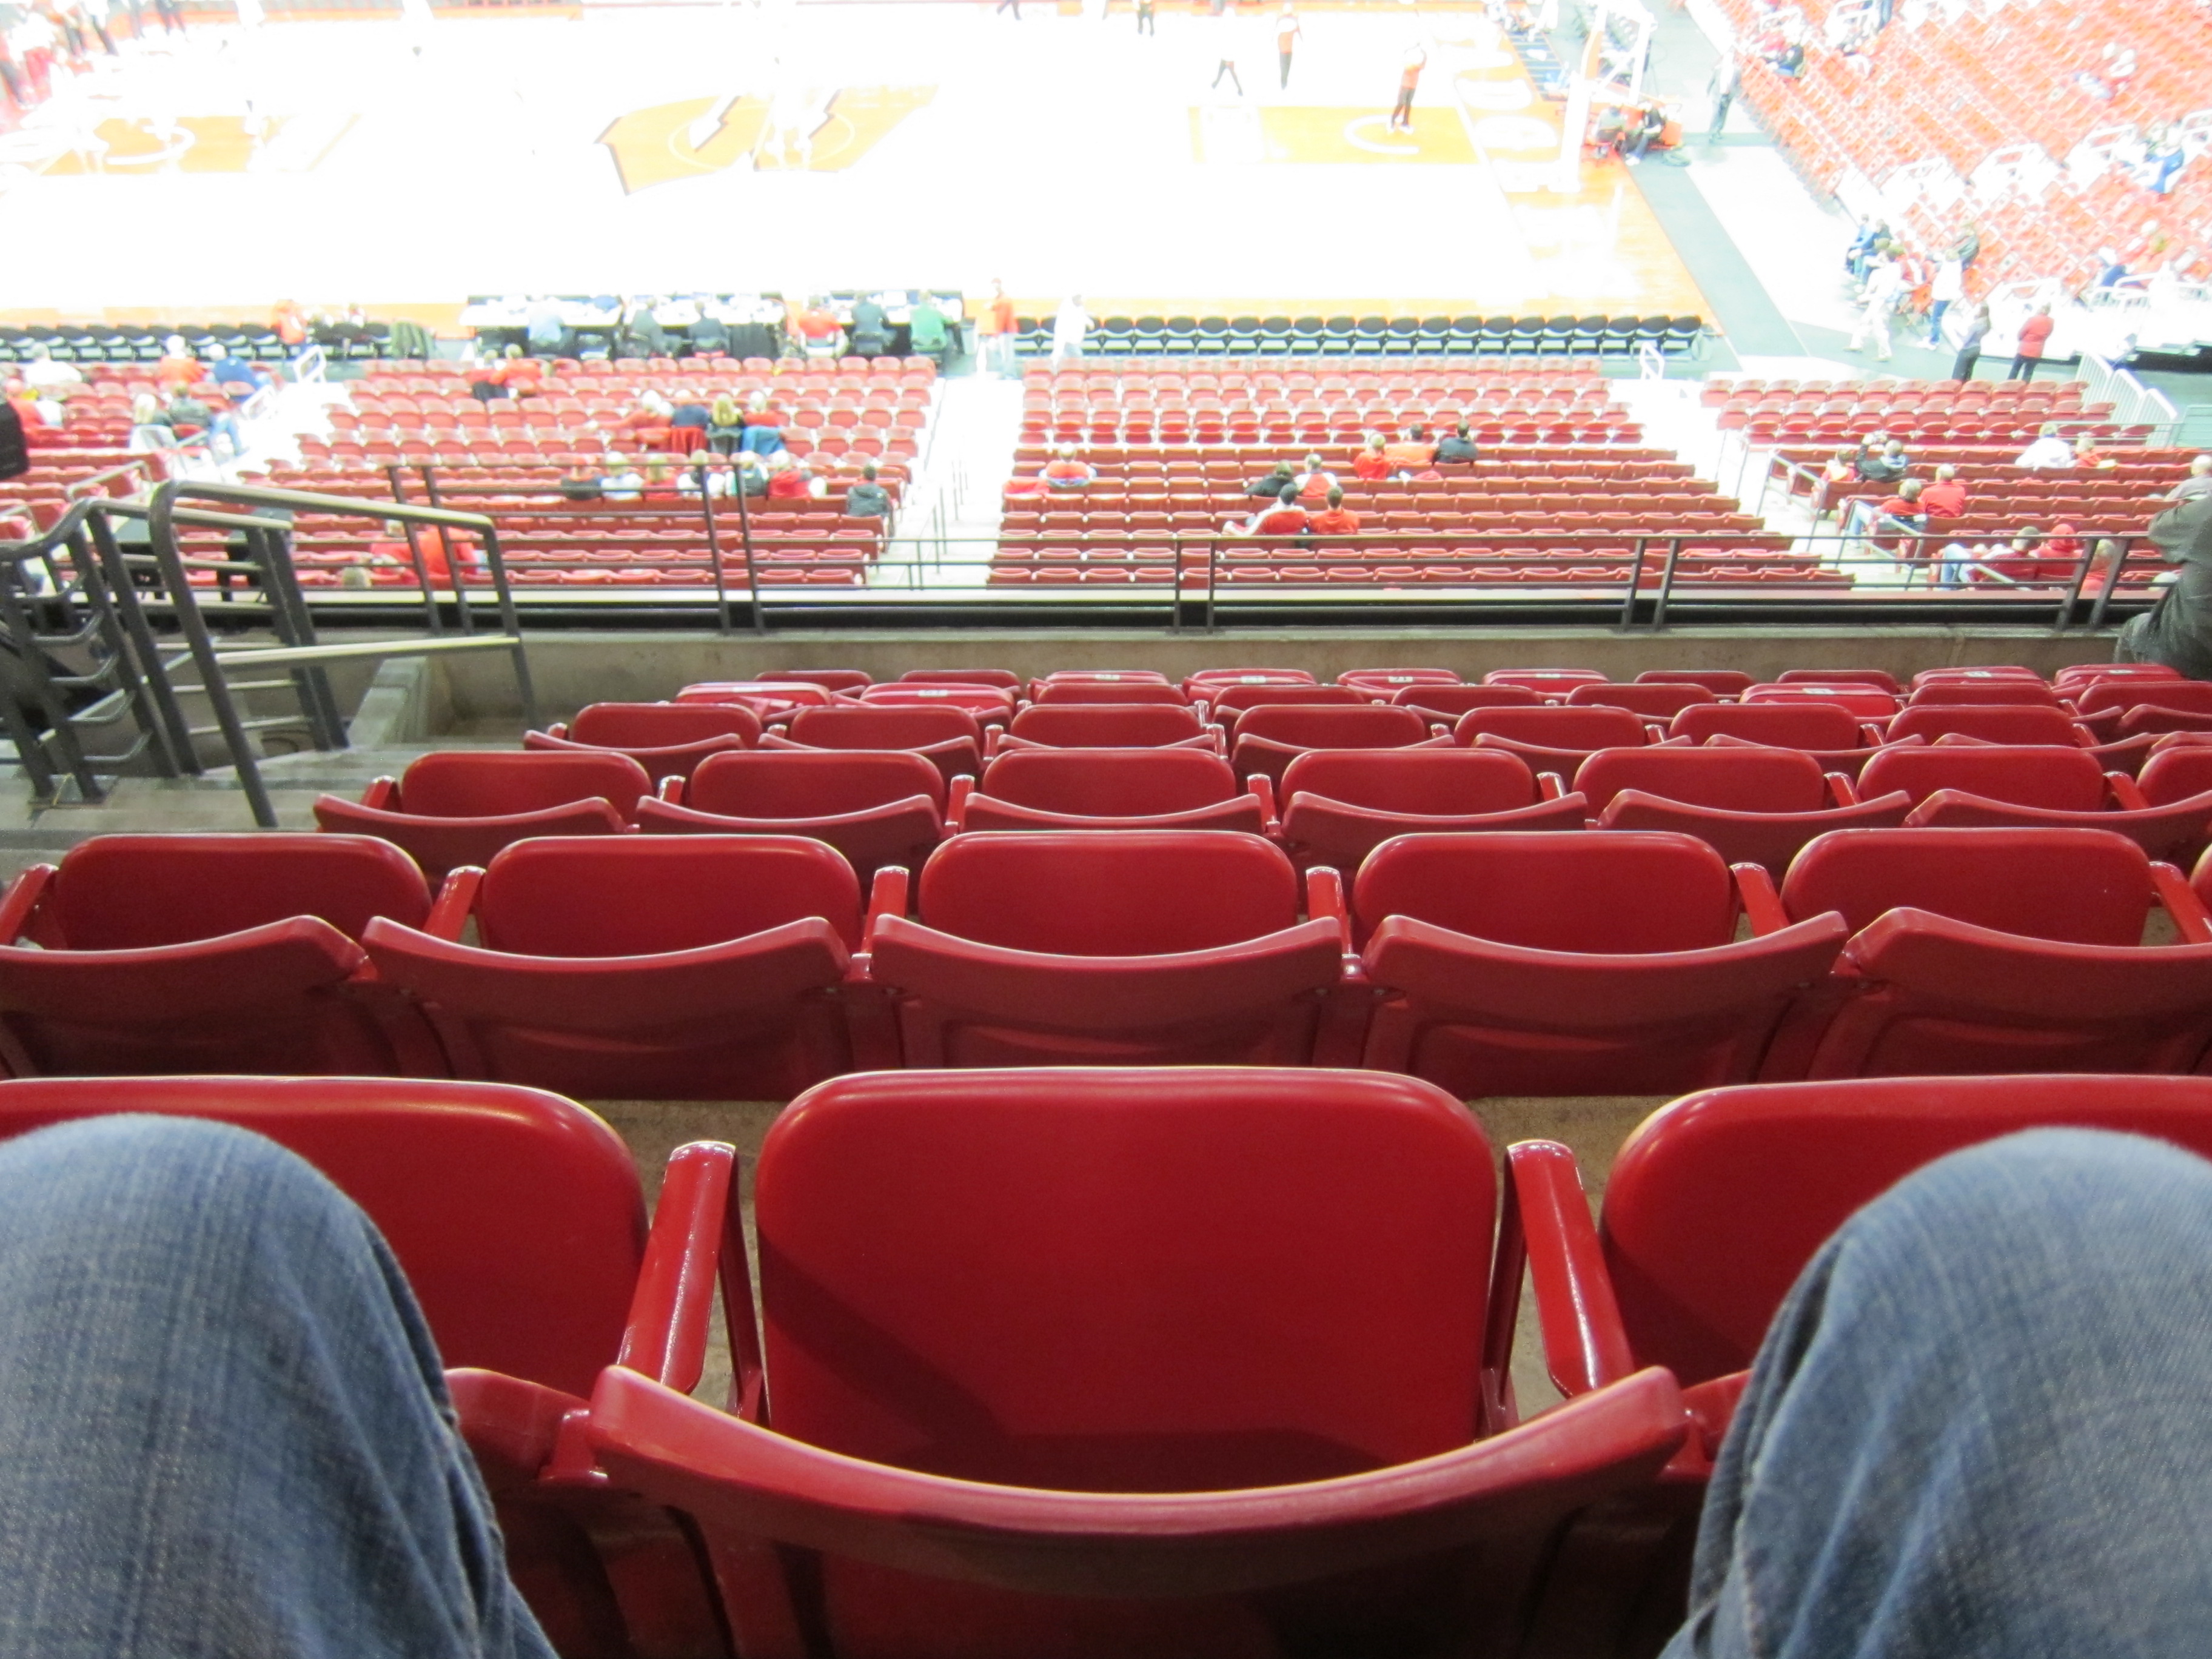 Kohl Center Seating Chart With Rows | Cabinets Matttroy